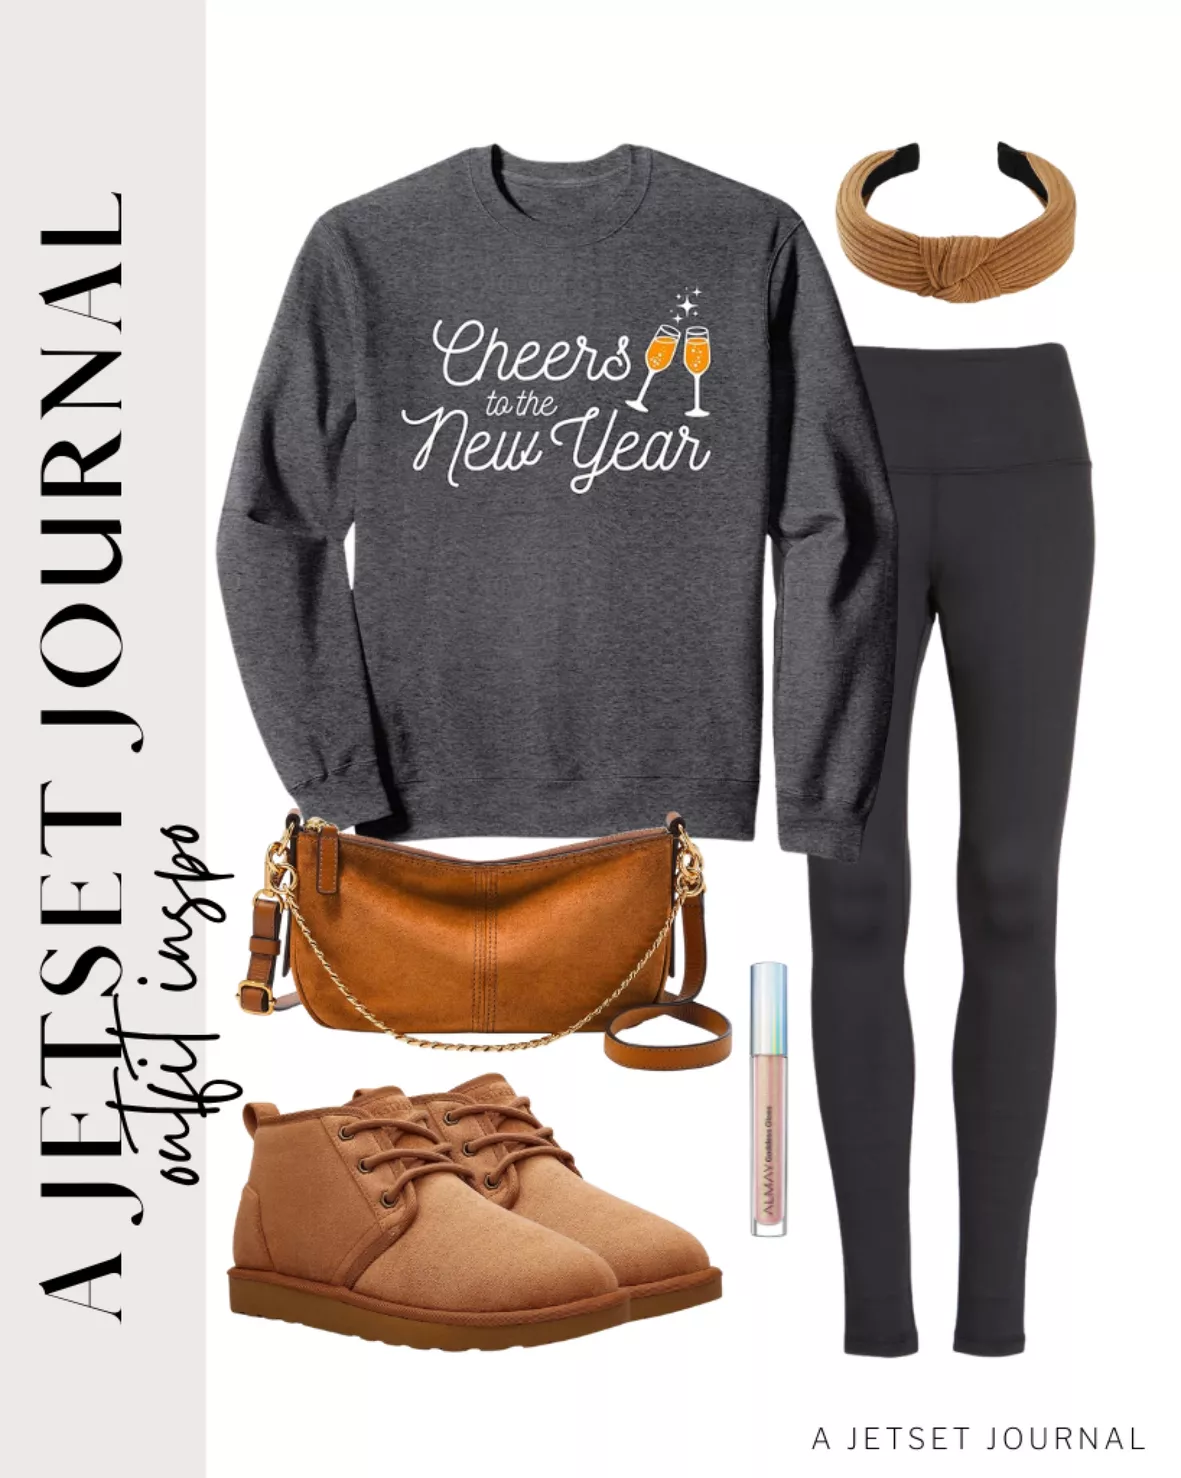 Outfit Ideas to Style this Season - A Jetset Journal